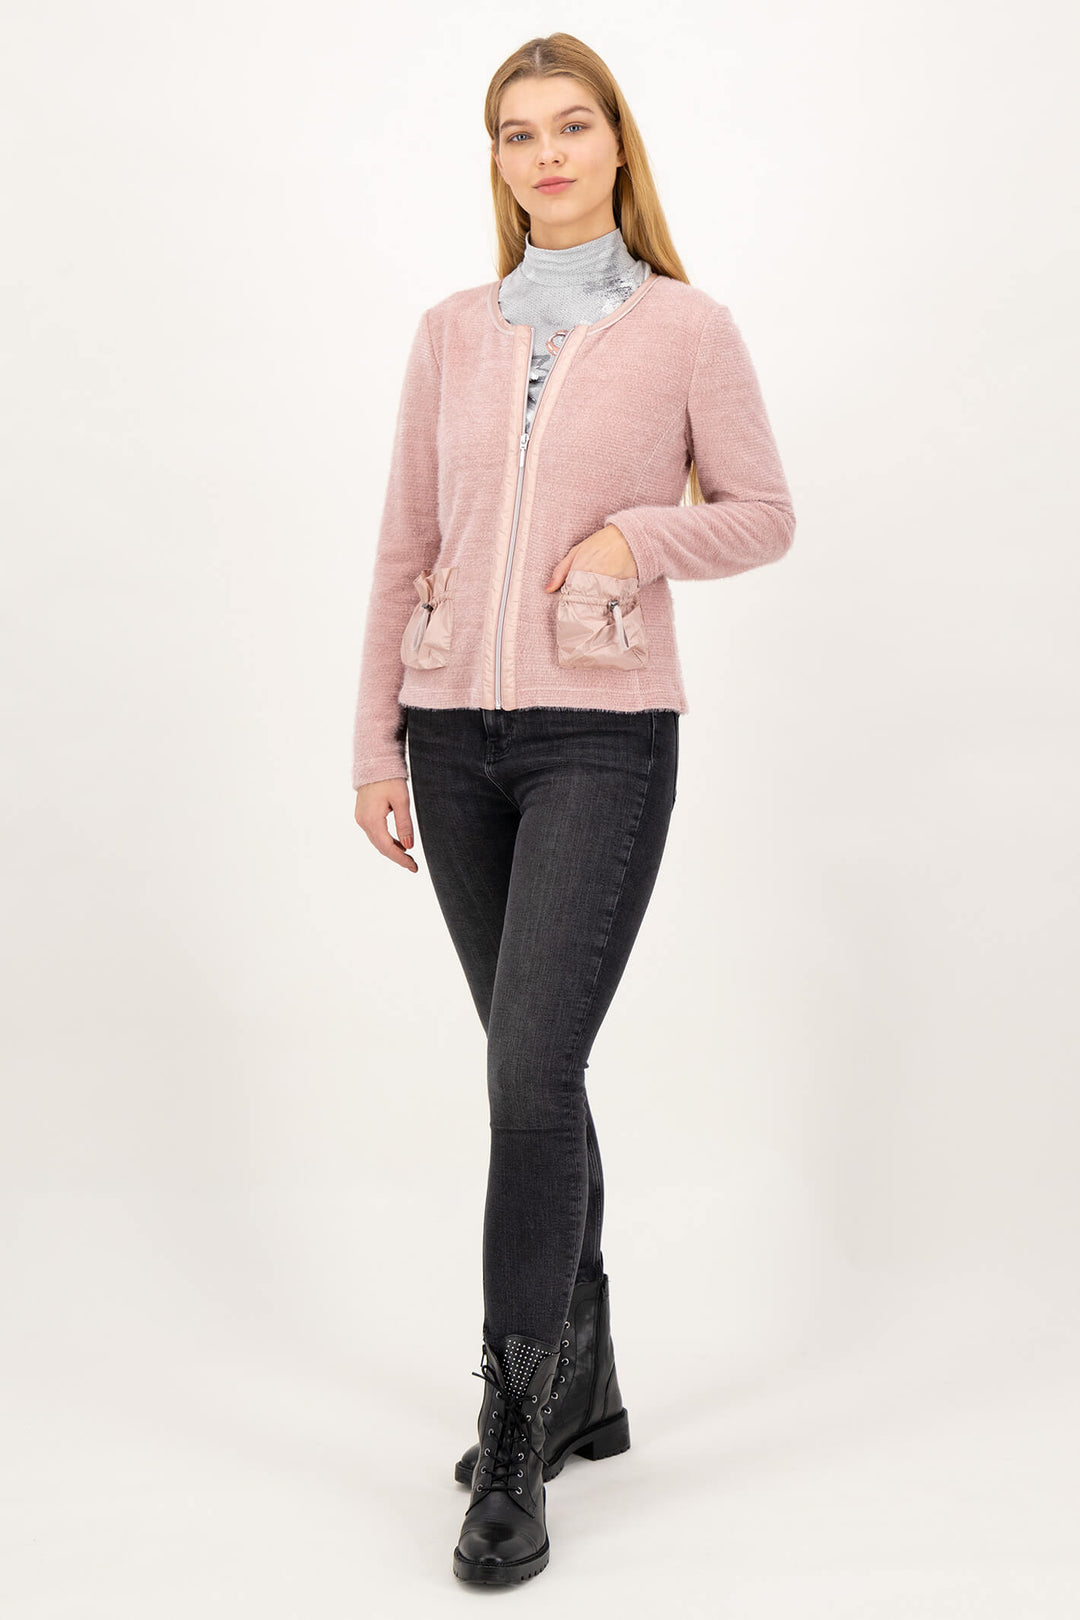 Just White C2157-310 Rose Pink Uni Zip Front Knitted Jacket - Shirley Allum Boutique